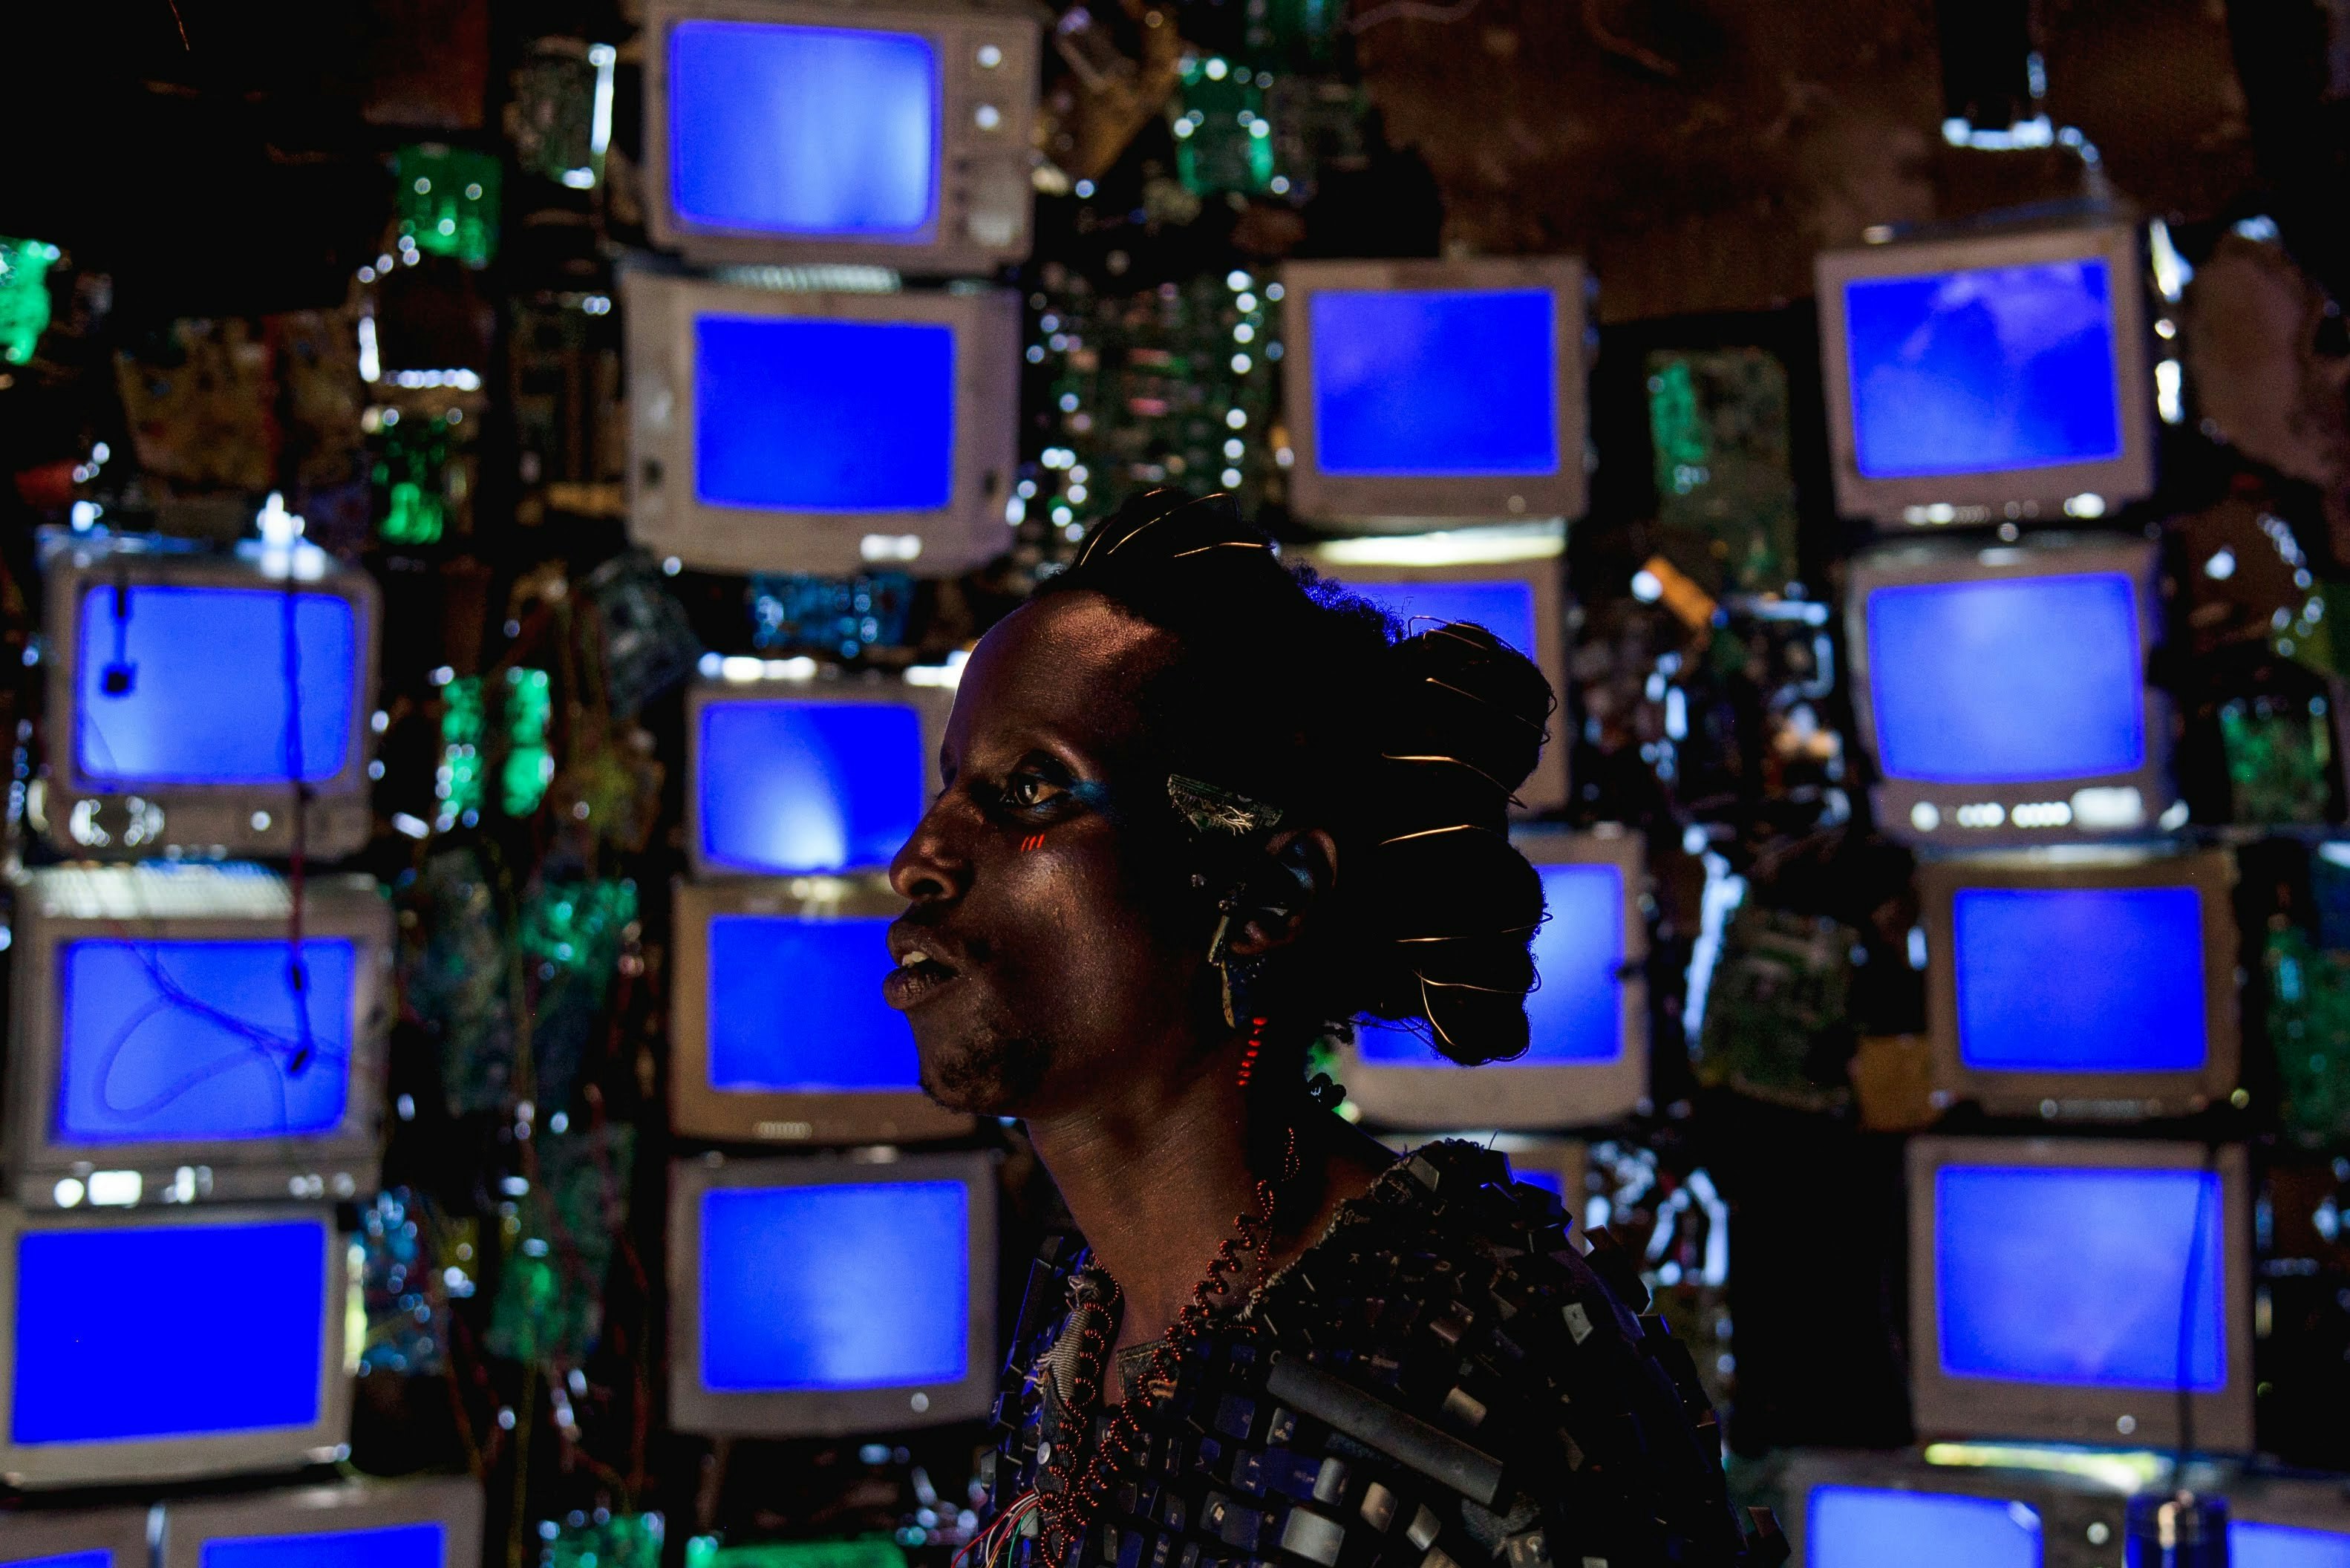 Person with hair and ear accessories in front of 4 columns of television sets with blue screens.